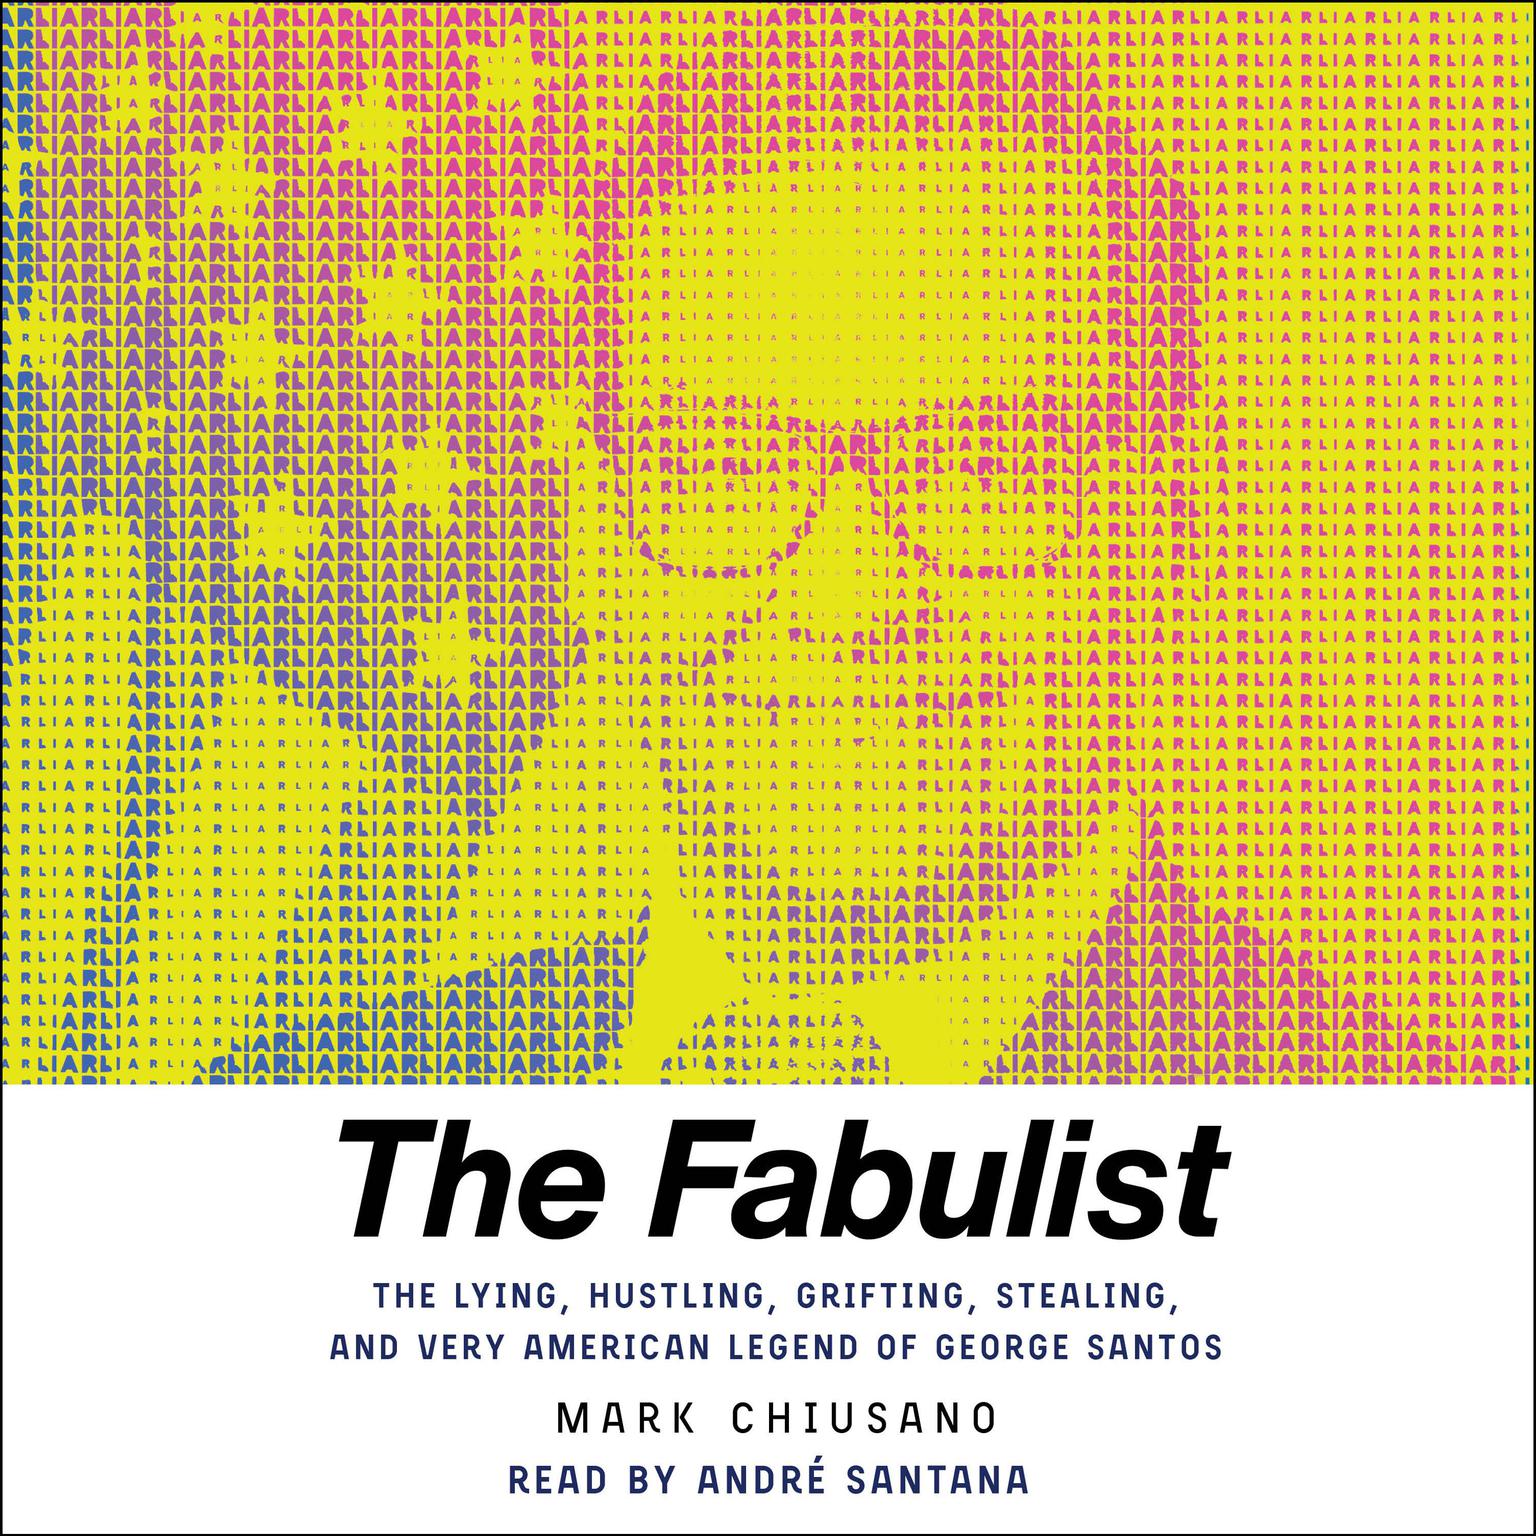 The Fabulist: The Lying, Hustling, Grifting, Stealing, and Very American Legend of George Santos Audiobook, by Mark Chiusano